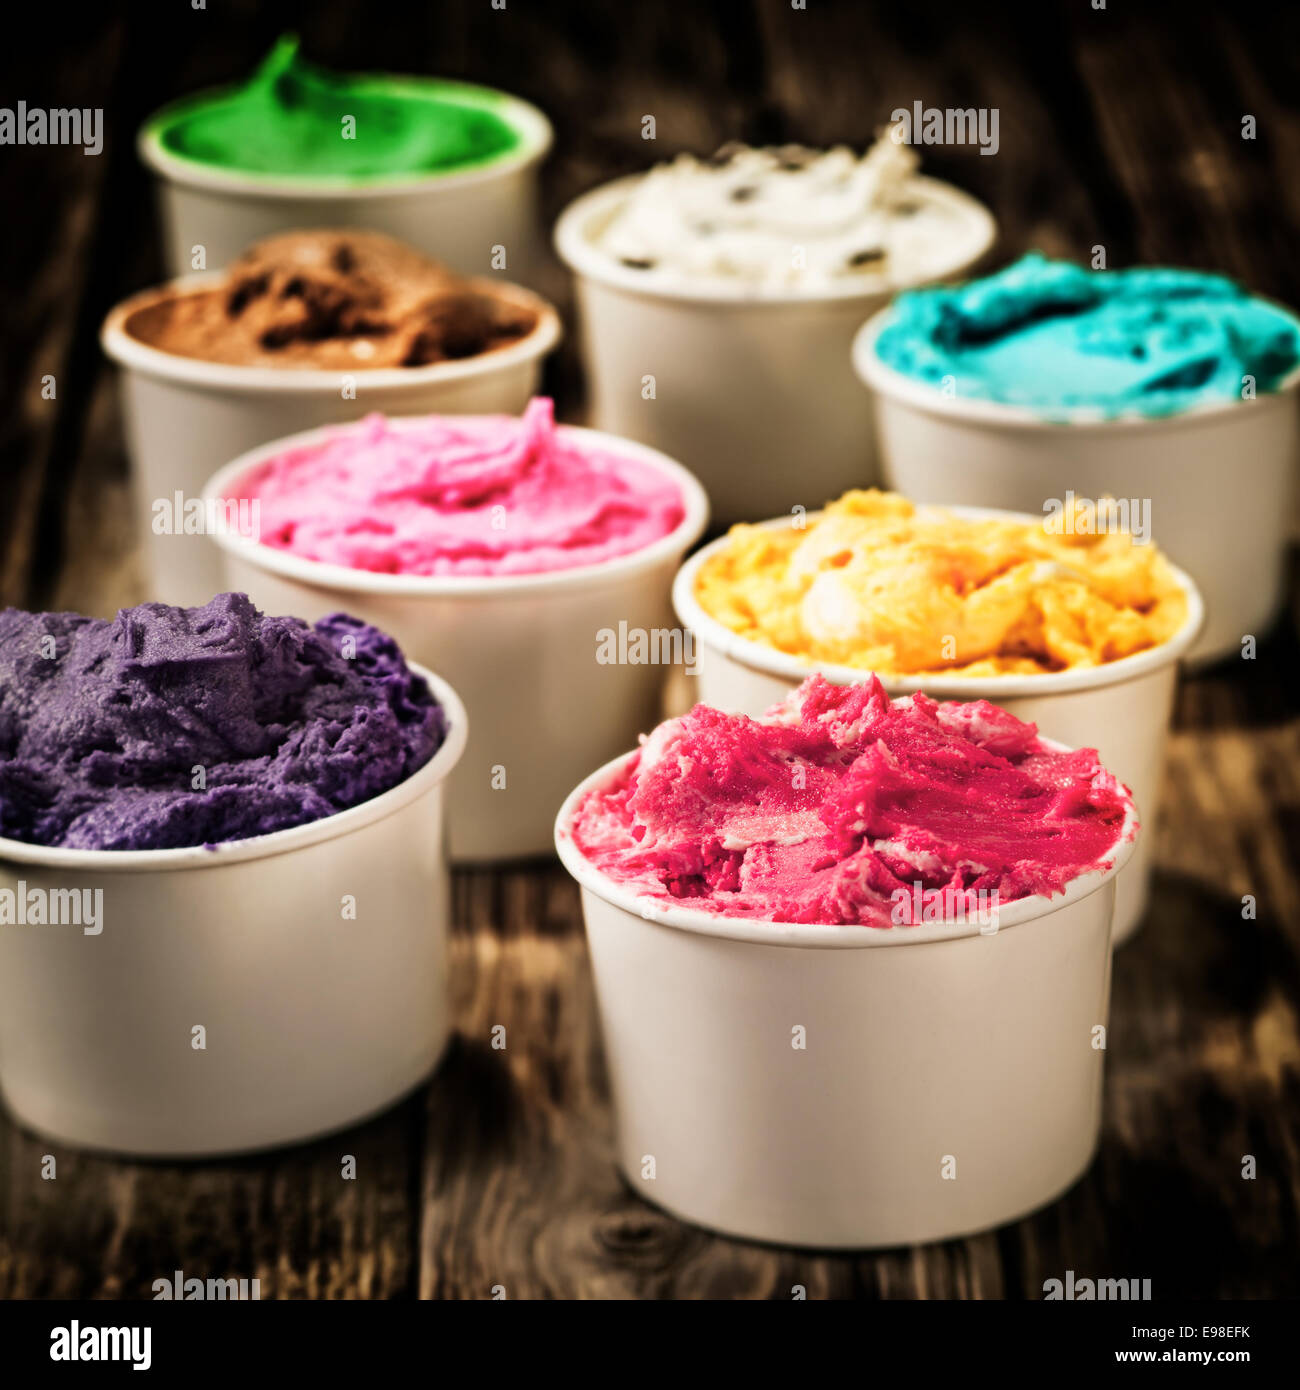 https://c8.alamy.com/comp/E98EFK/assorted-colorful-tubs-of-fresh-dairy-ice-cream-in-multiple-colors-E98EFK.jpg